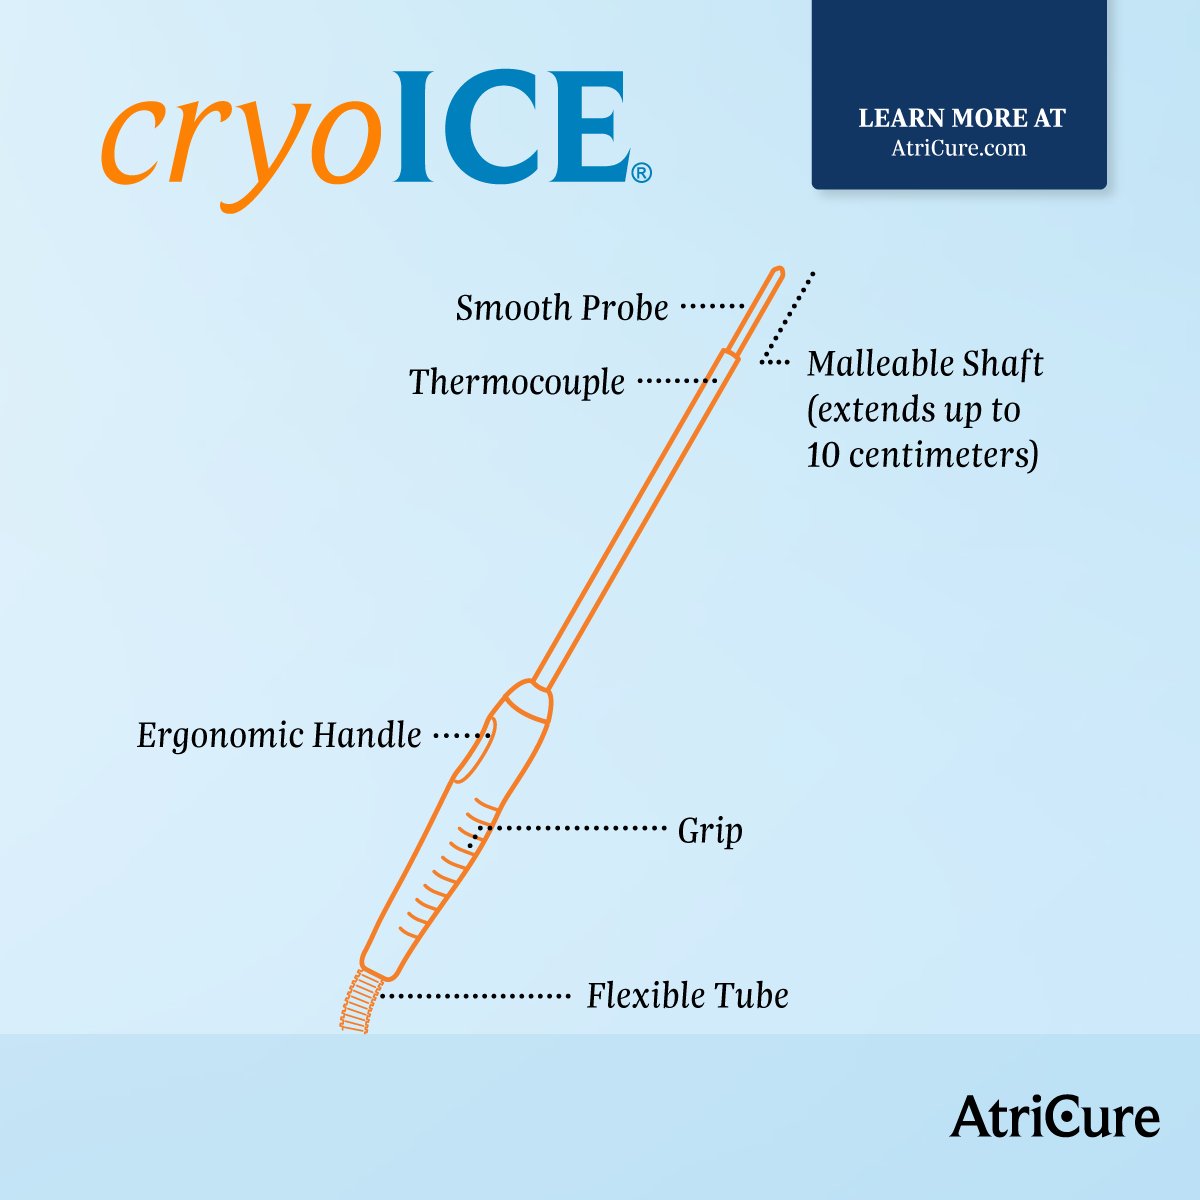 Crafted with retractable handles and flexible tube sets, cryoICE® offers ergonomic capabilities, adapting seamlessly to various hand positions for enhanced maneuverability. Discover the power of cryoICE at: okt.to/x9QVUj #Cardiotwitter